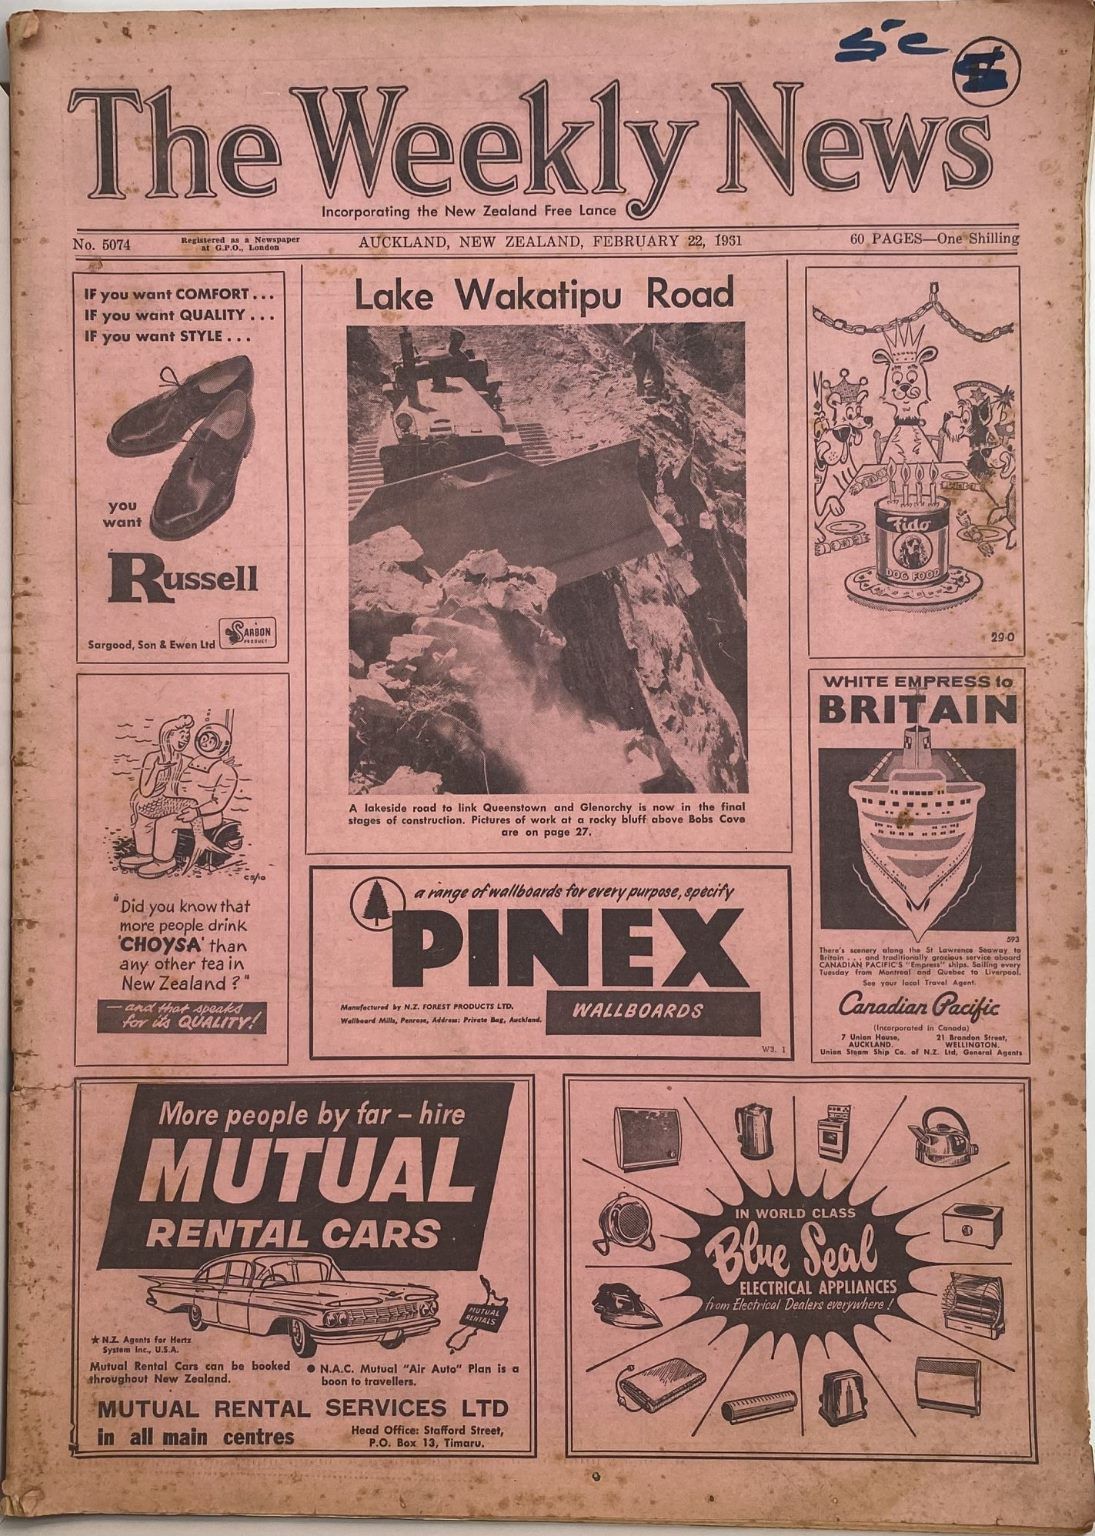 OLD NEWSPAPER: The Weekly News, 22 February 1961